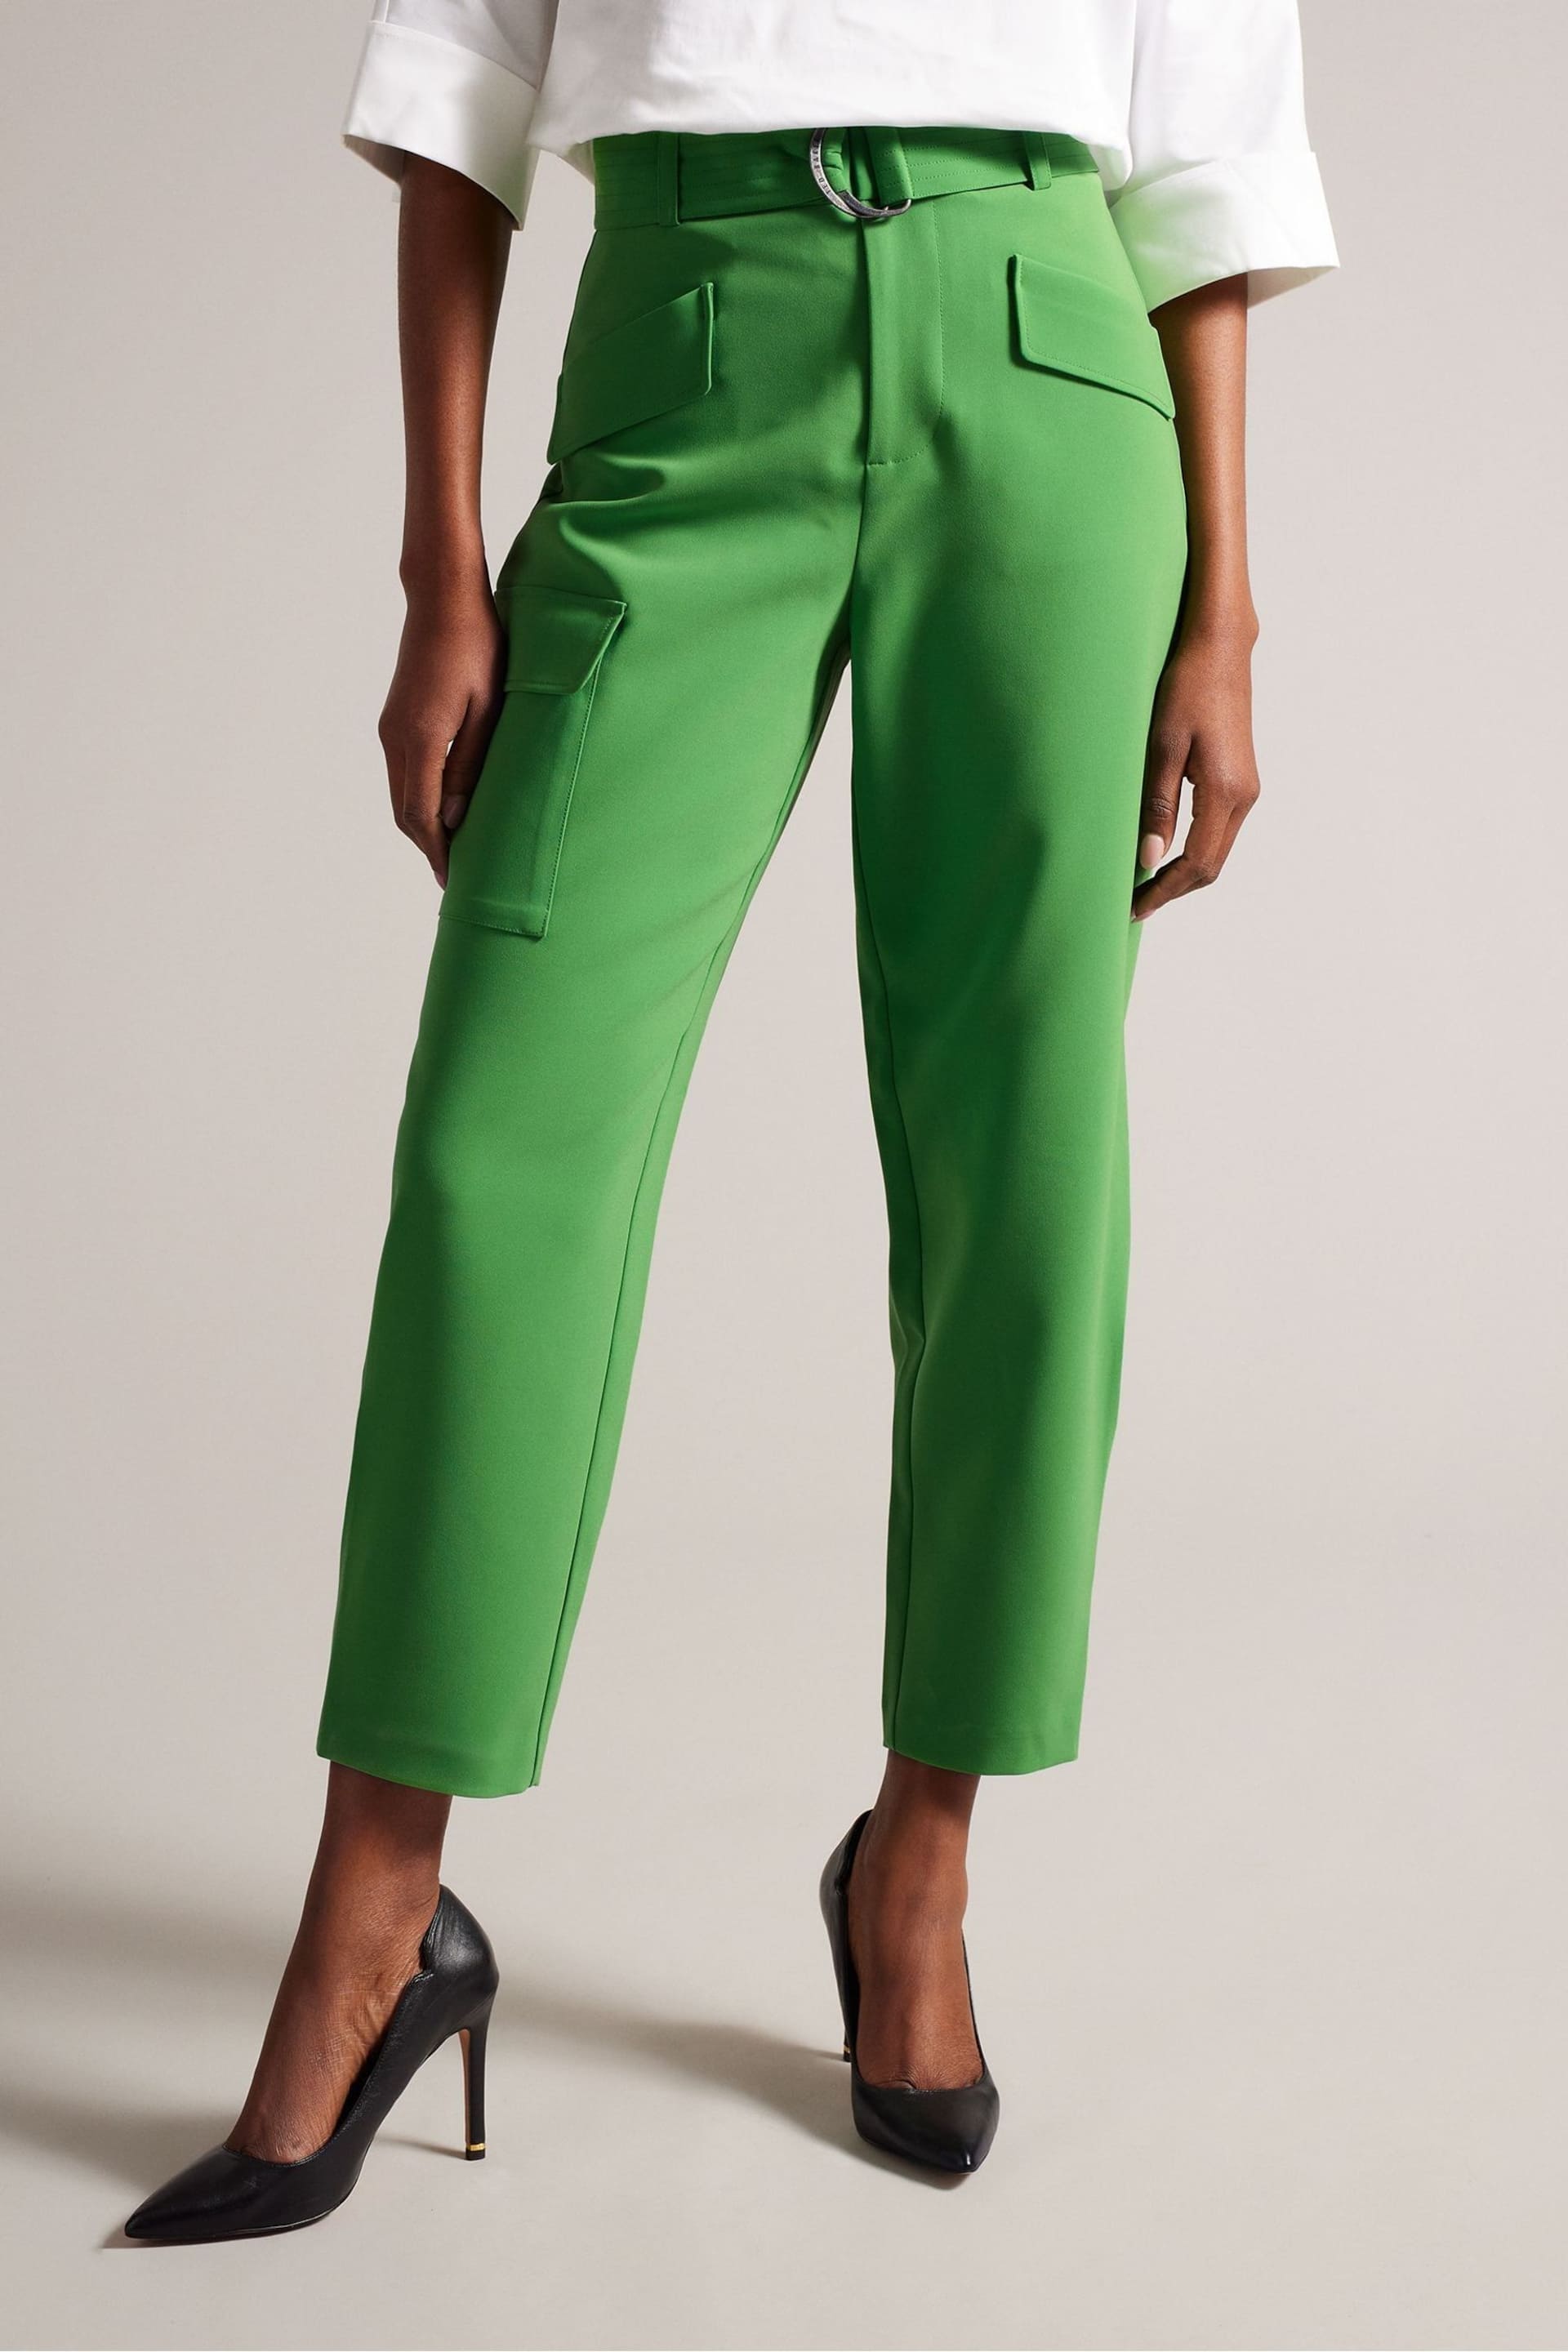 Ted Baker Green Gracieh High Waisted Belted Tapered Cargo Trousers - Image 2 of 5